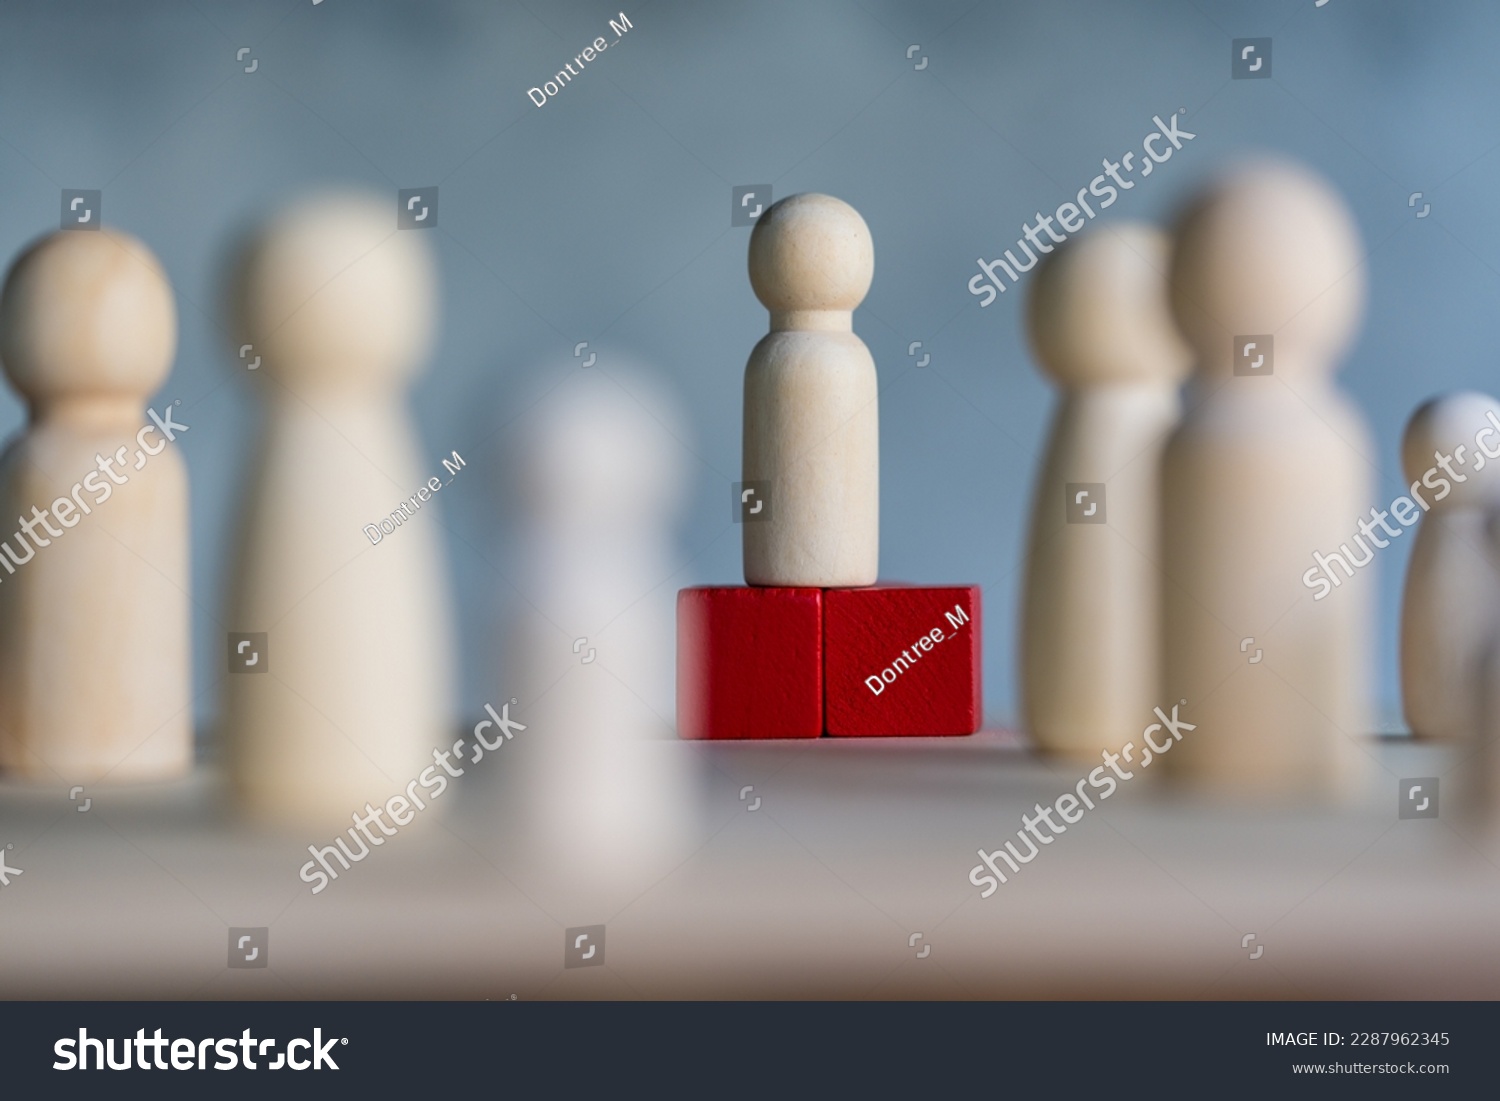 Wooden figures and peg dolls standing on the red podium 1st positions of wooden cube blocks. Ranking and strategy concept. Leadership concept and business strategy. Selective focus #2287962345